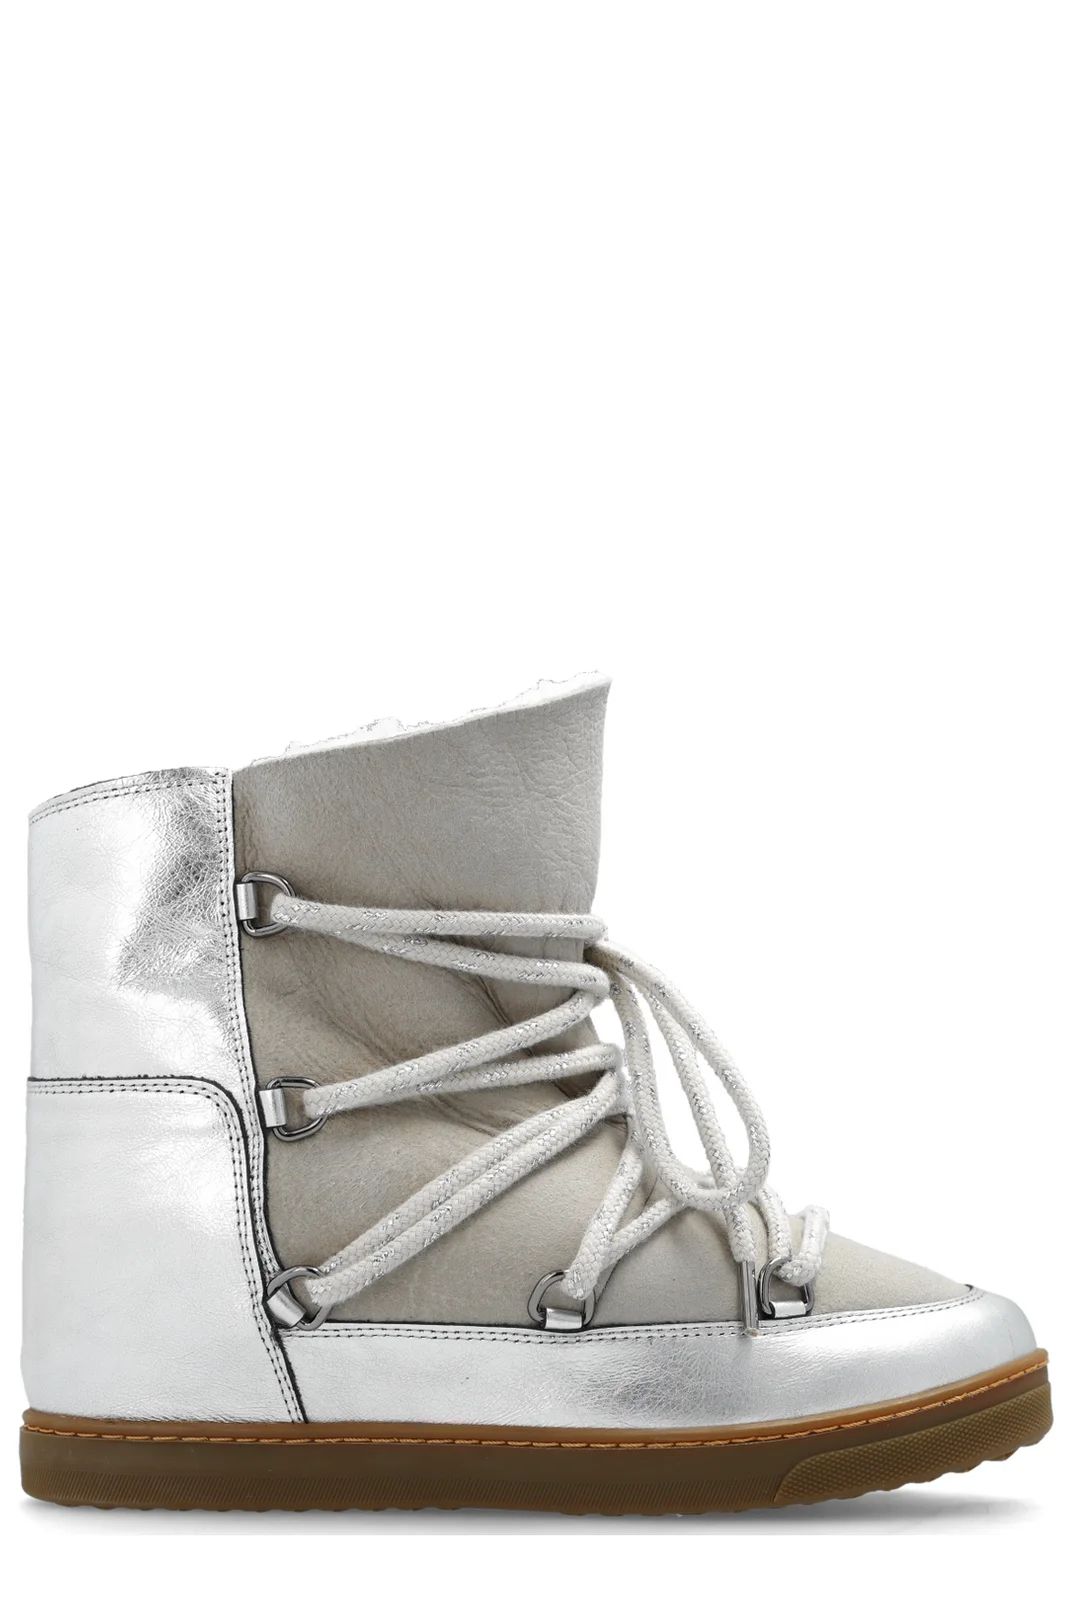 Isabel Marant Nowles Lace-Up Wedge Boots | Cettire Global